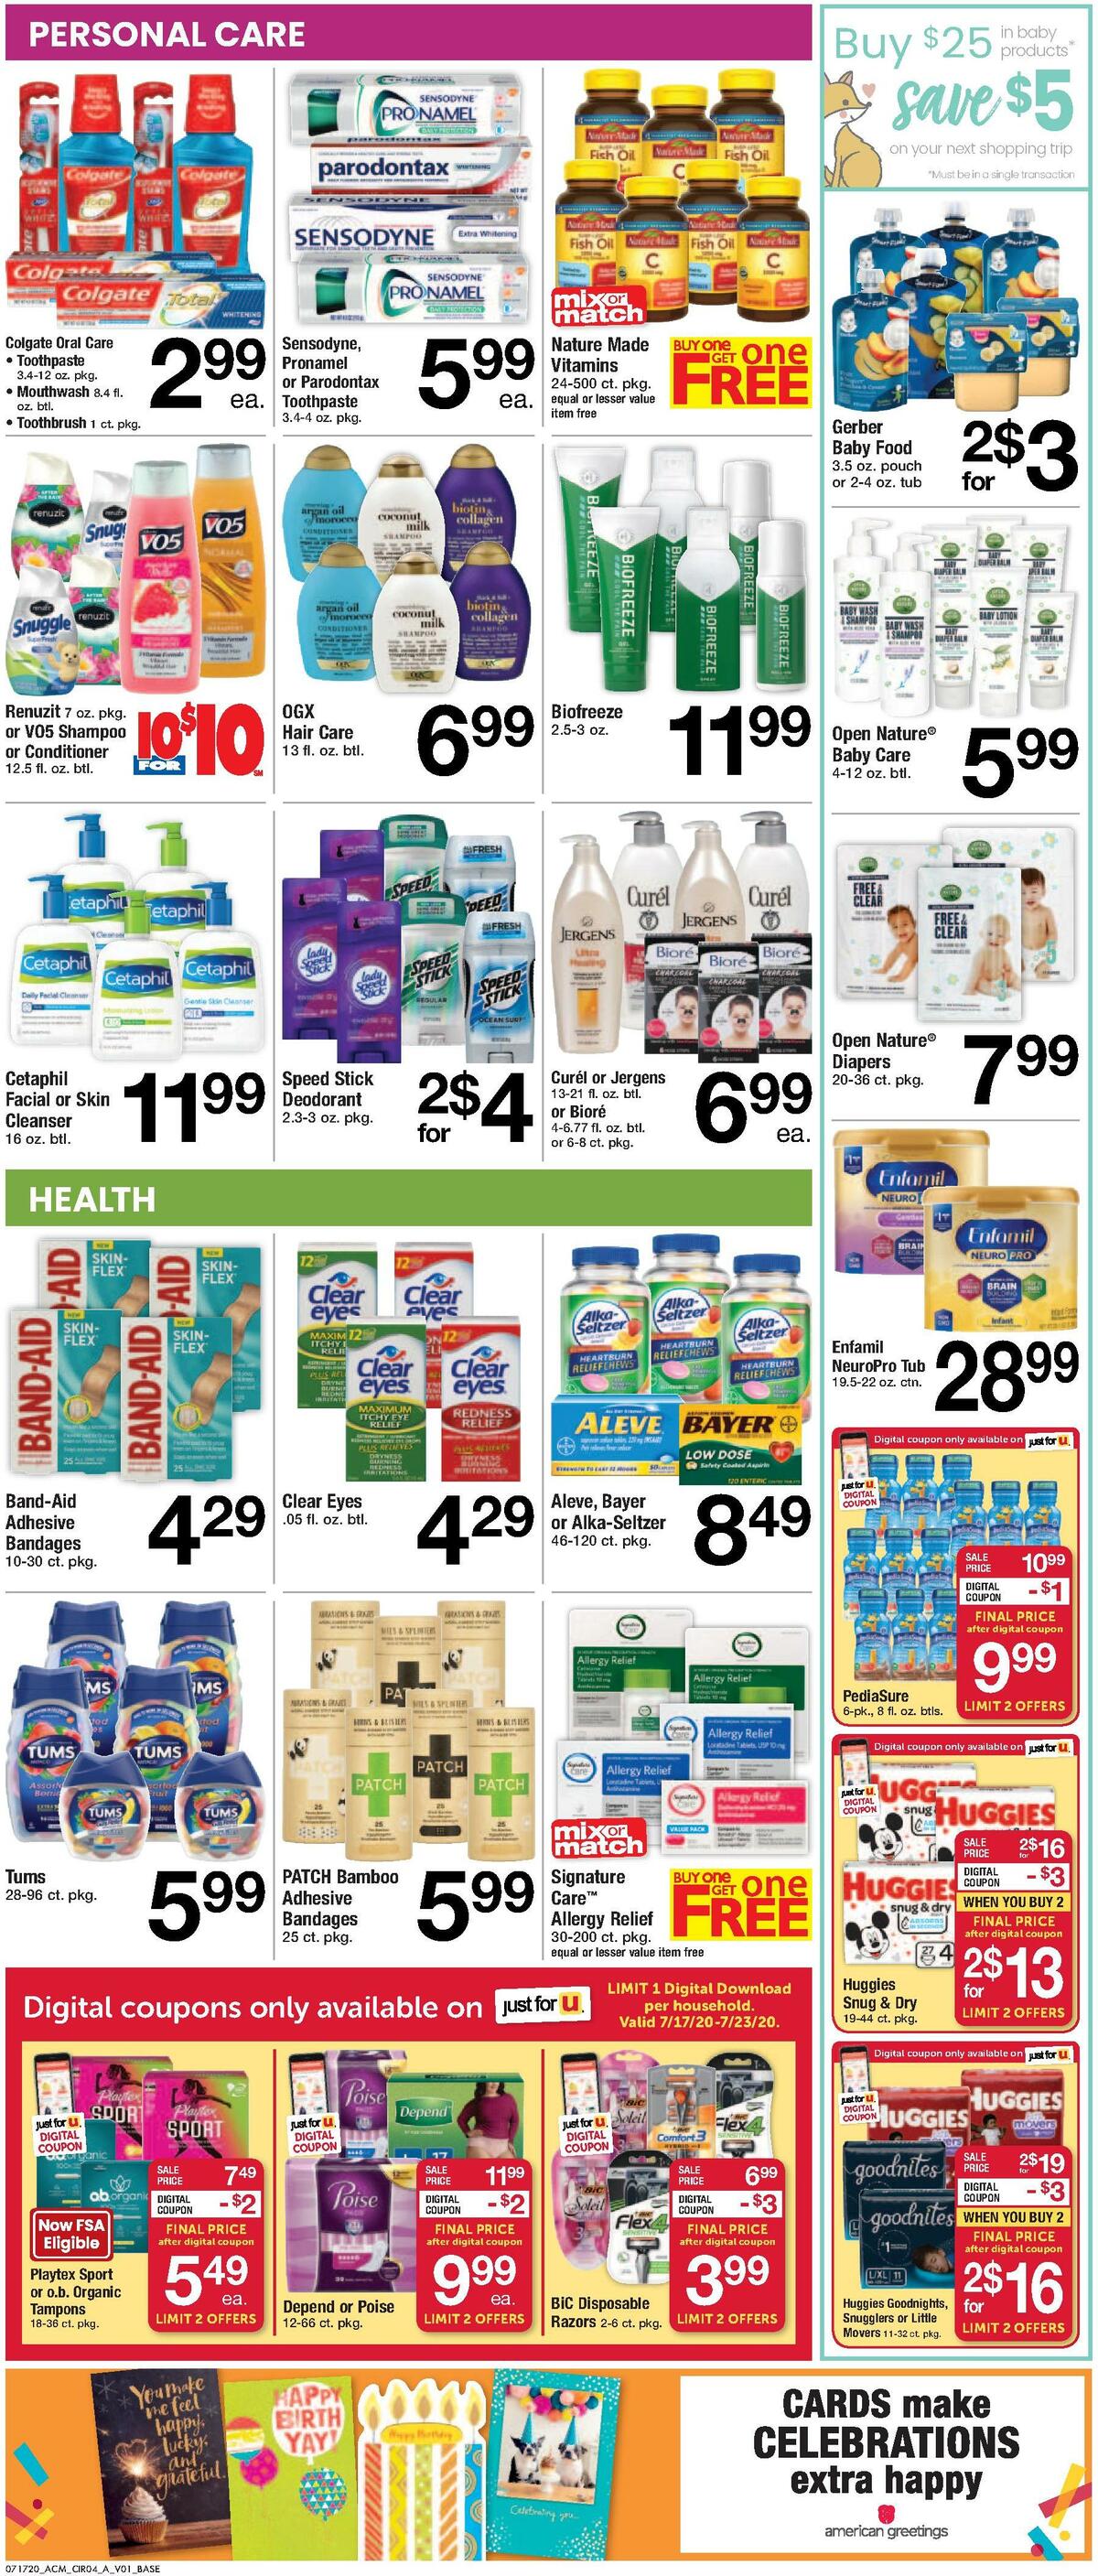 ACME Markets Weekly Ad from July 17